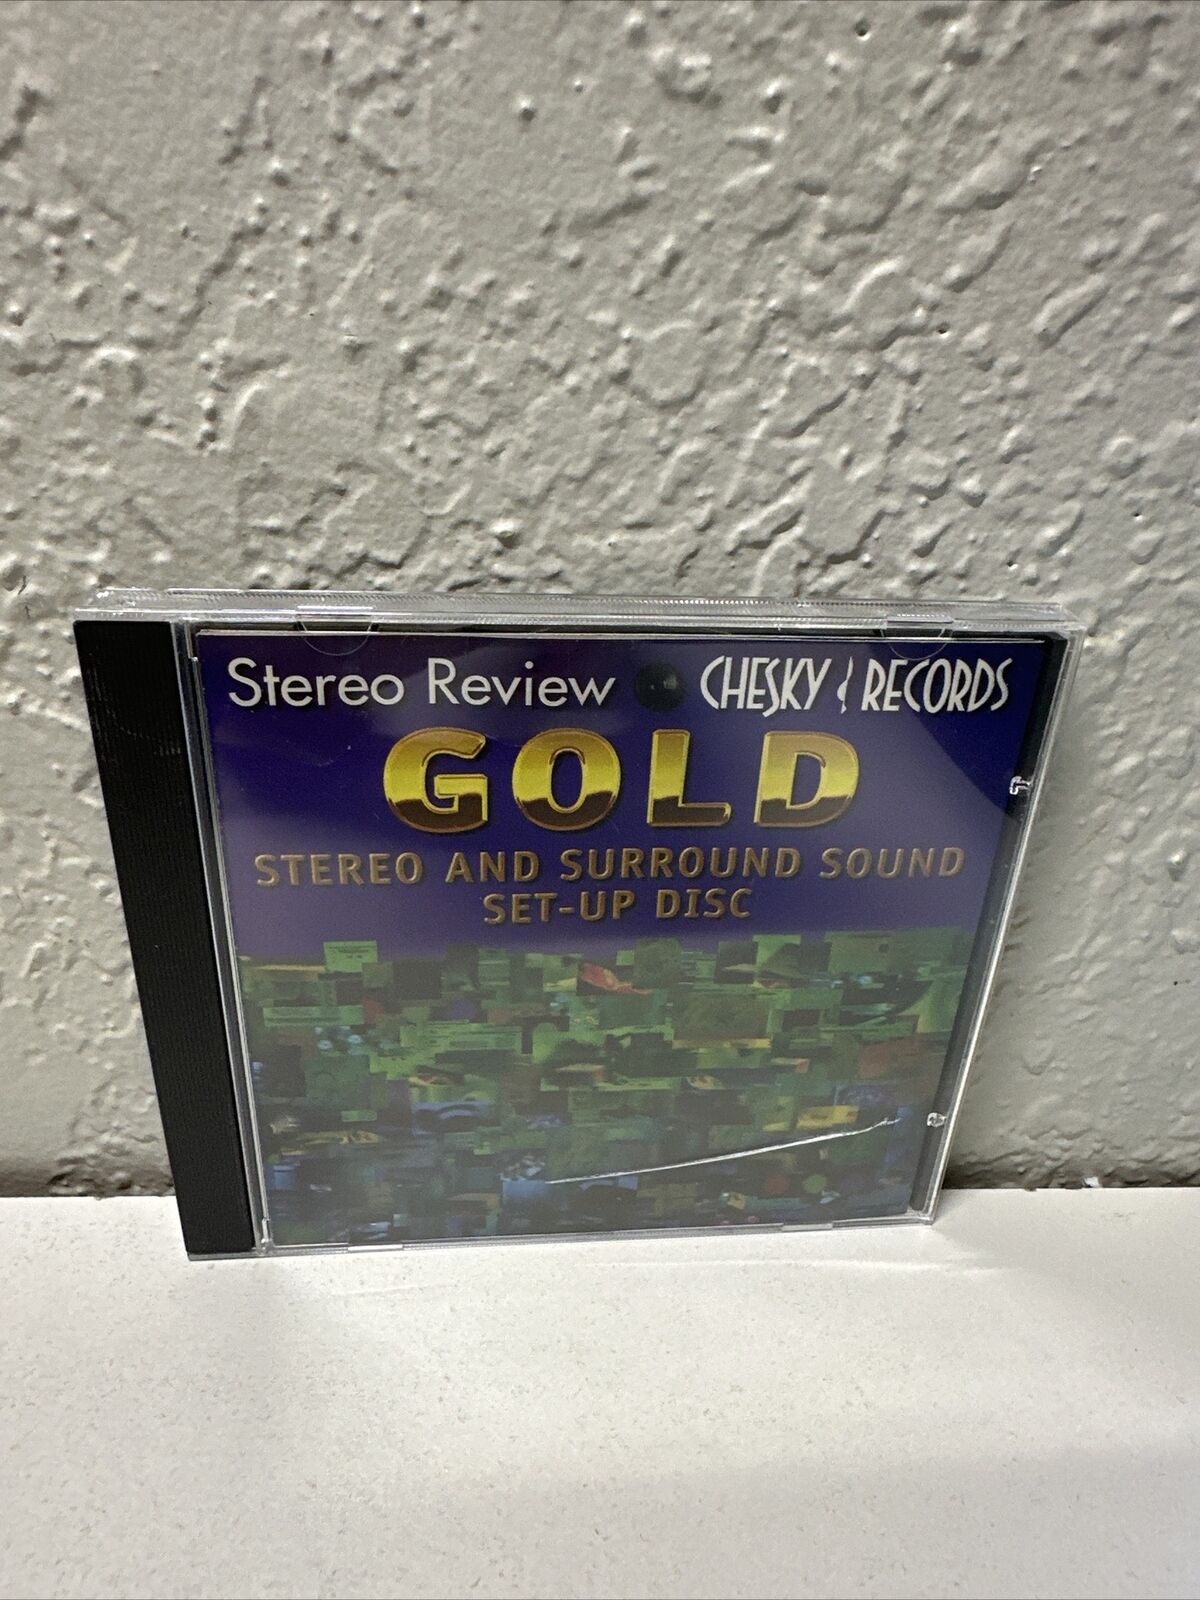 Stereo Review: Gold Stereo & Surround Set Up CD by Various Artists -